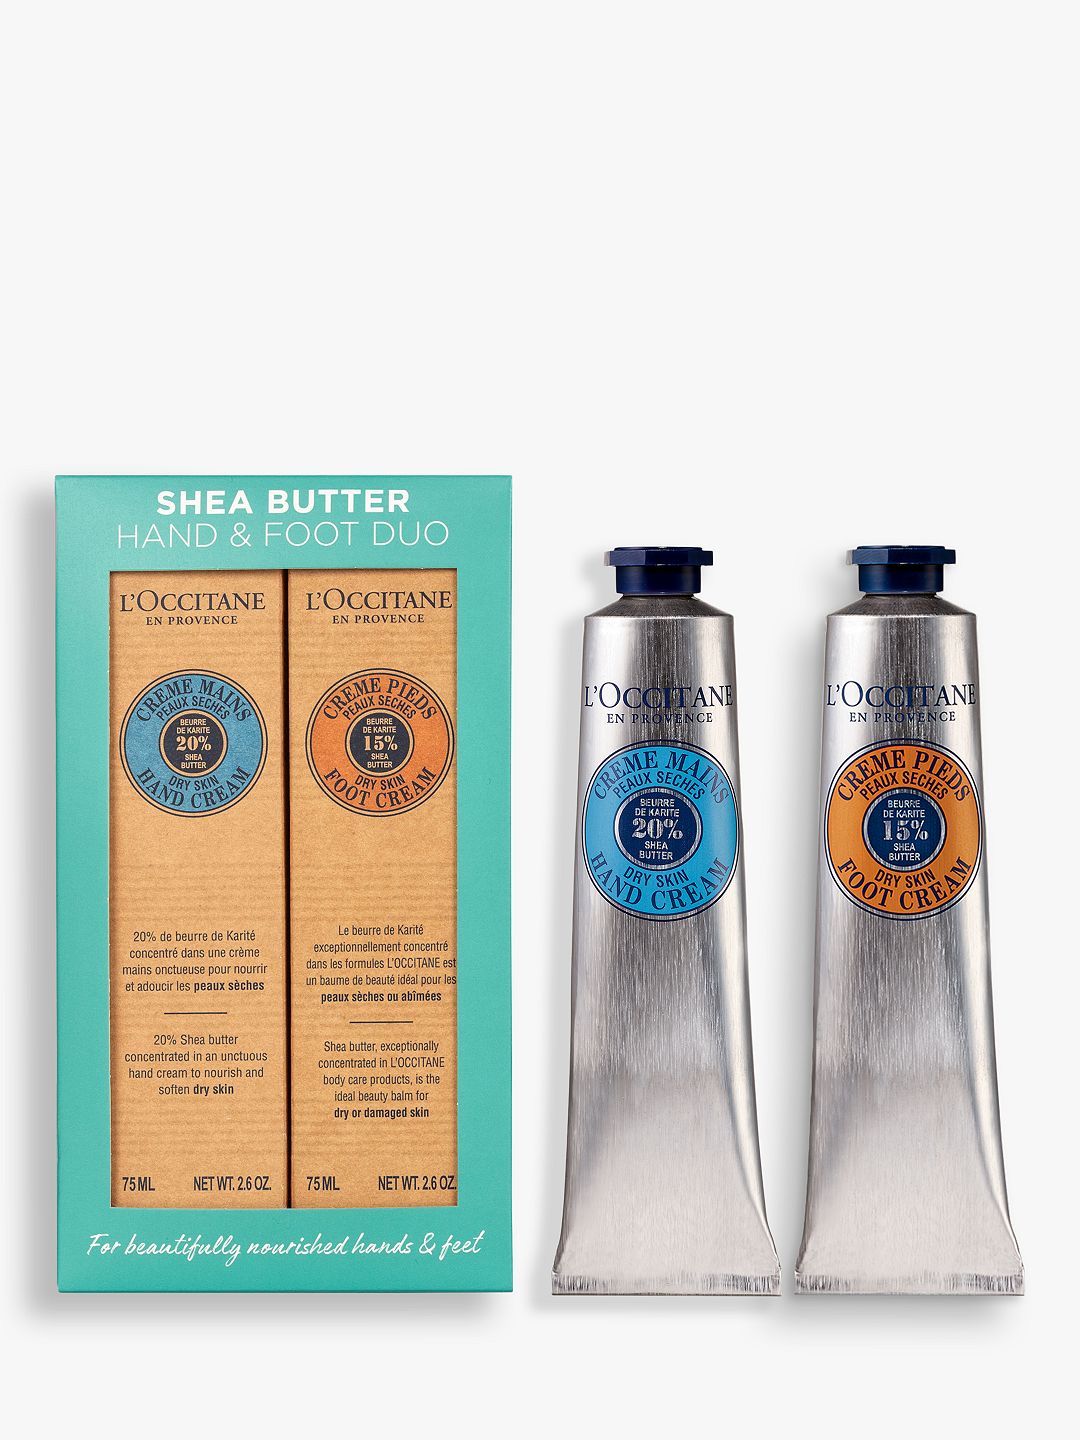 L'OCCITANE Shea Butter Hand and Foot Duo Bodycare Gift Set 1